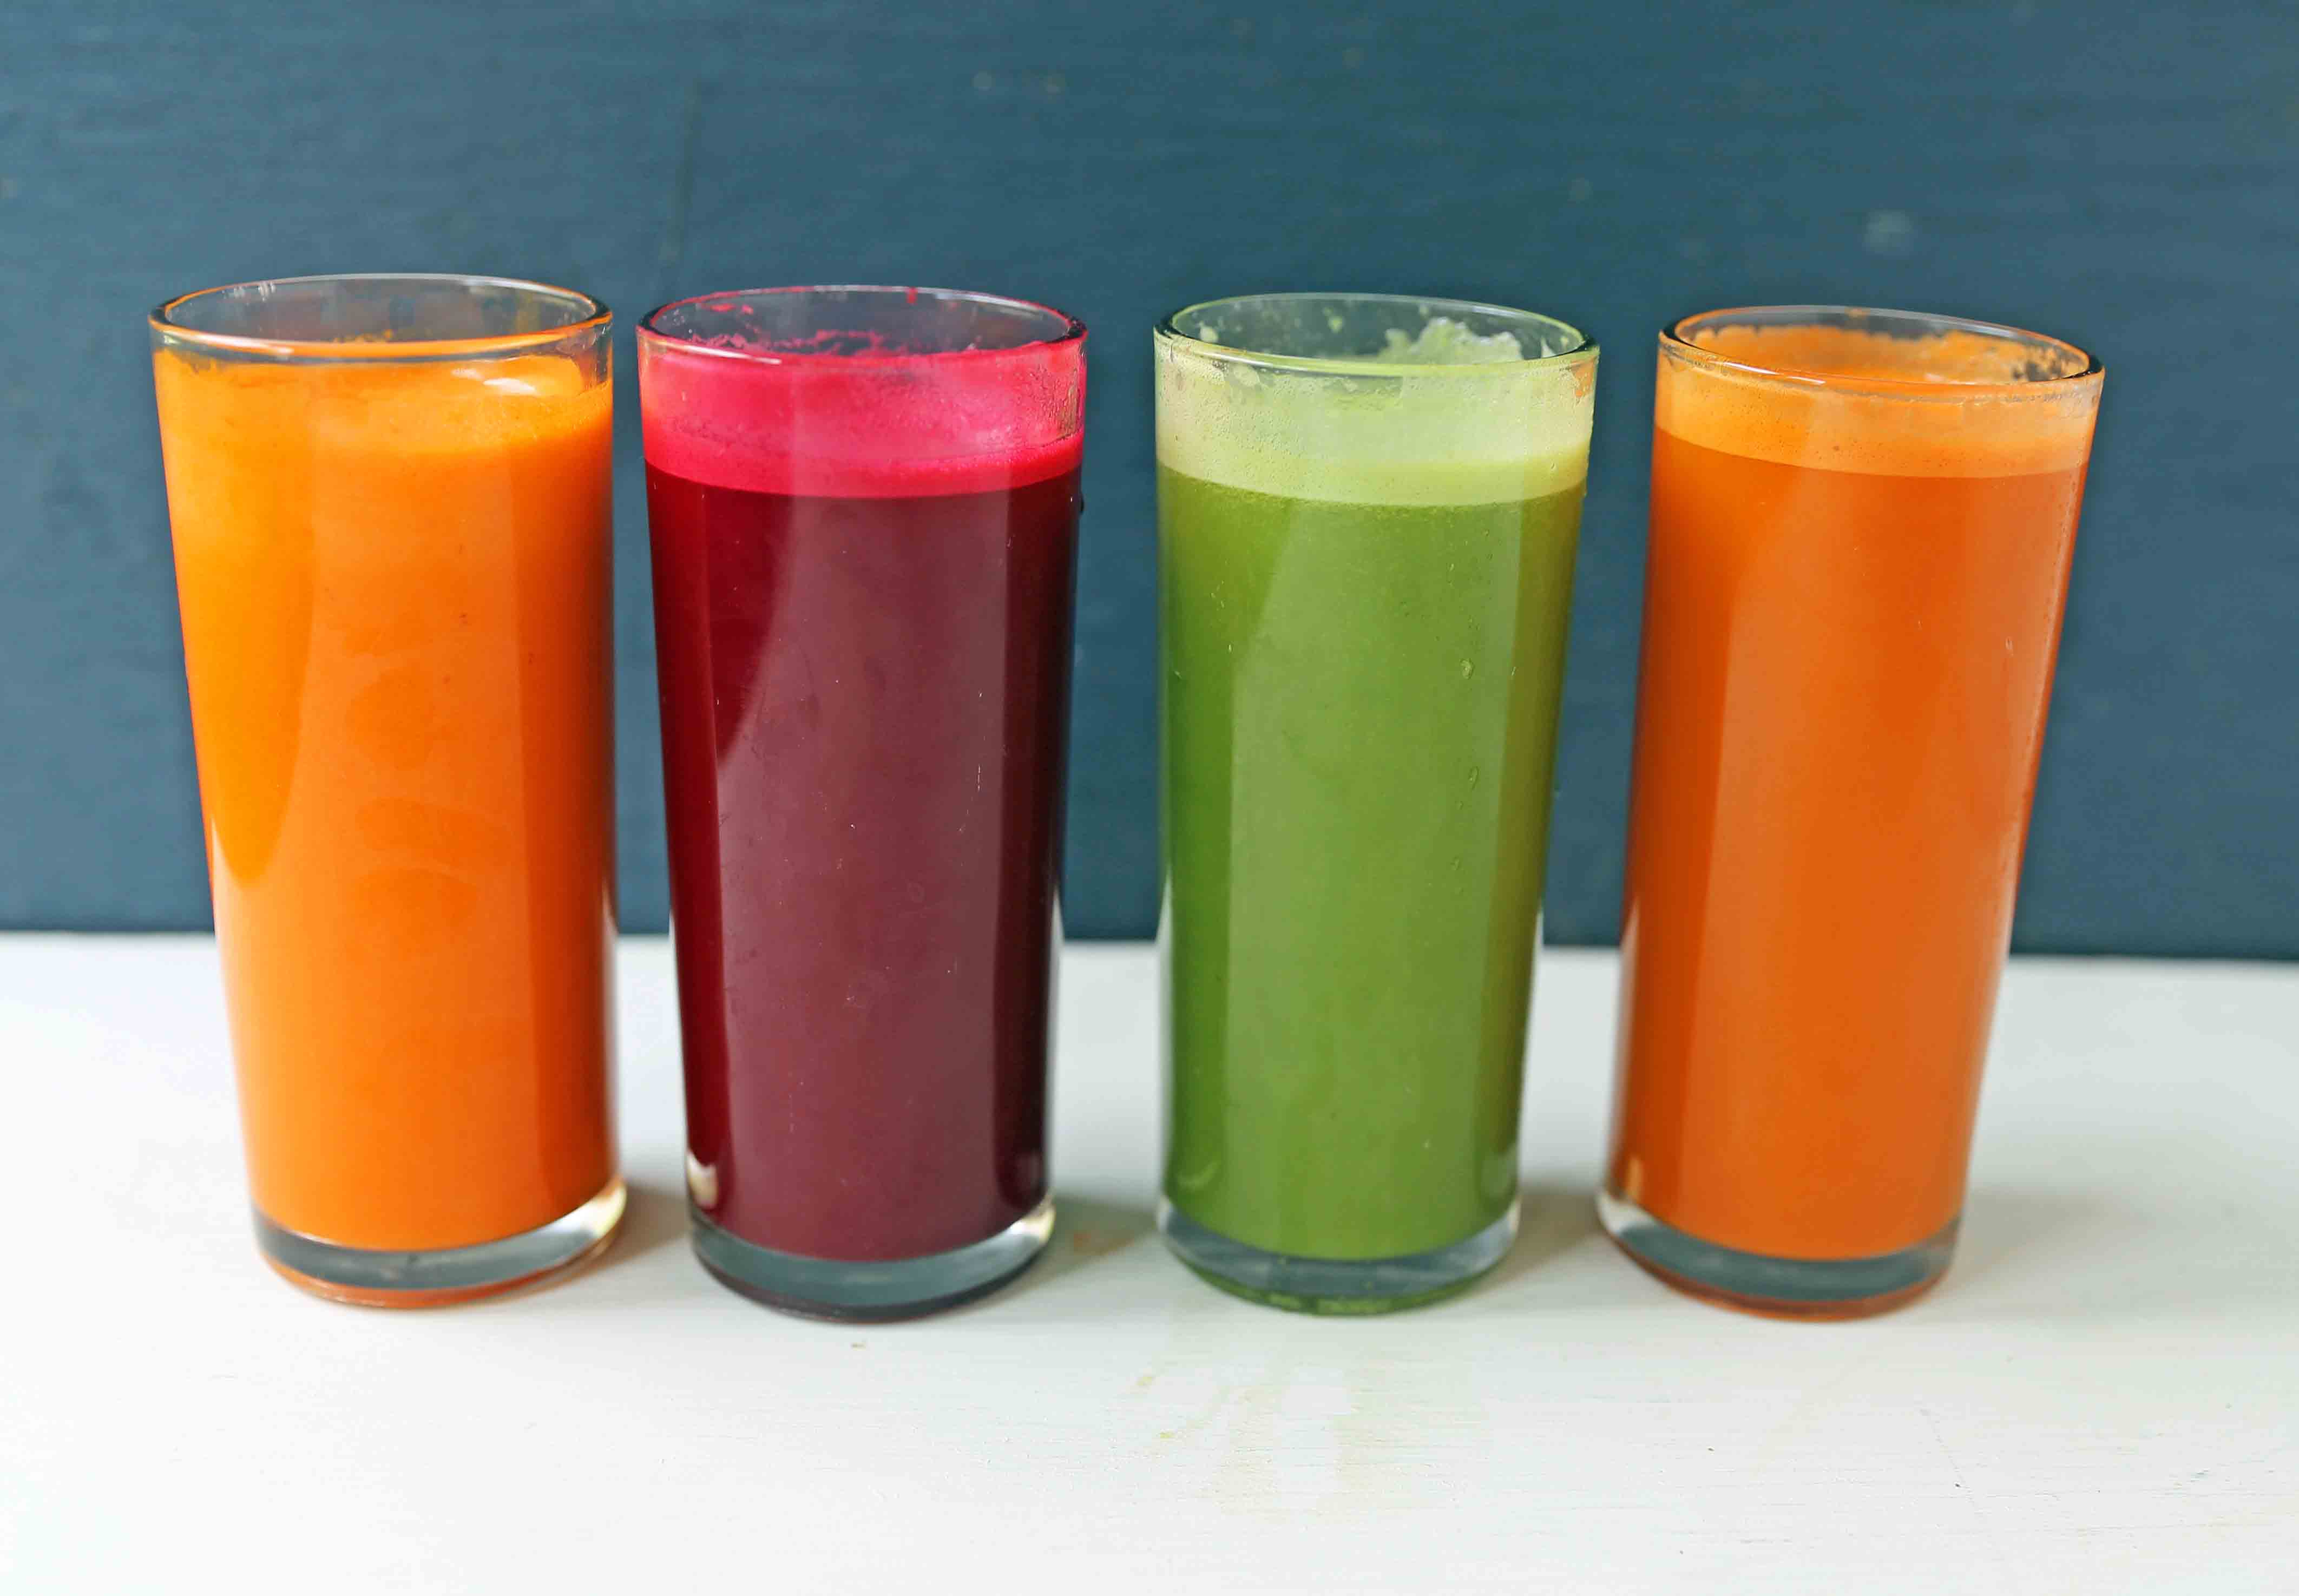 Healthy Juice Cleanse Recipes – Modern